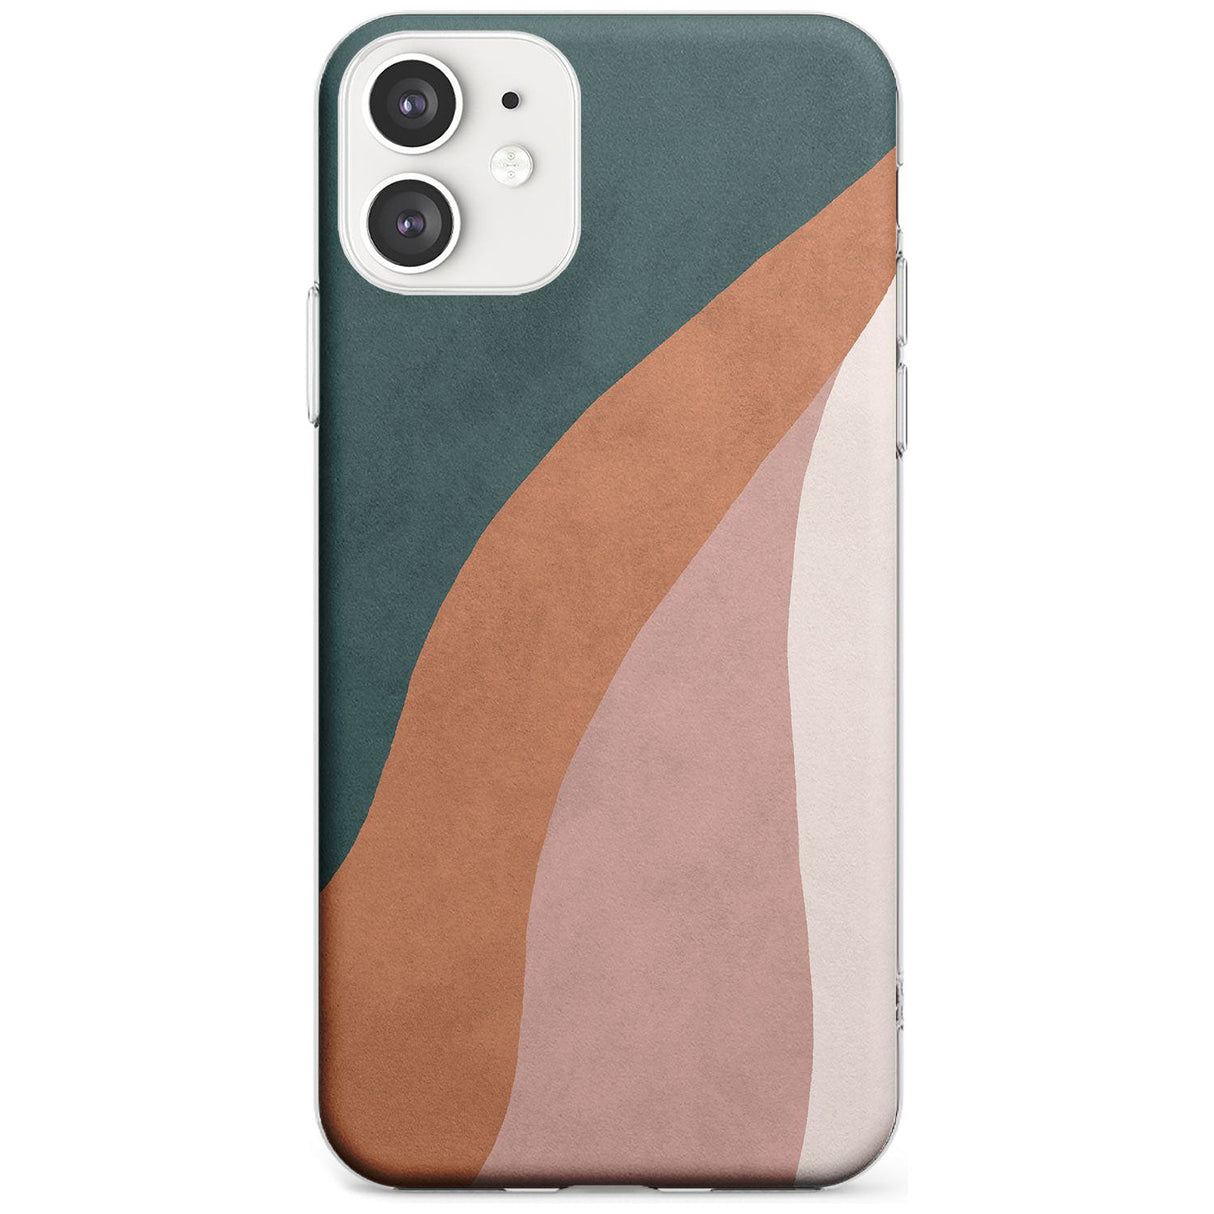 Lush Abstract Watercolour: Design #7 Slim TPU Phone Case for iPhone 11